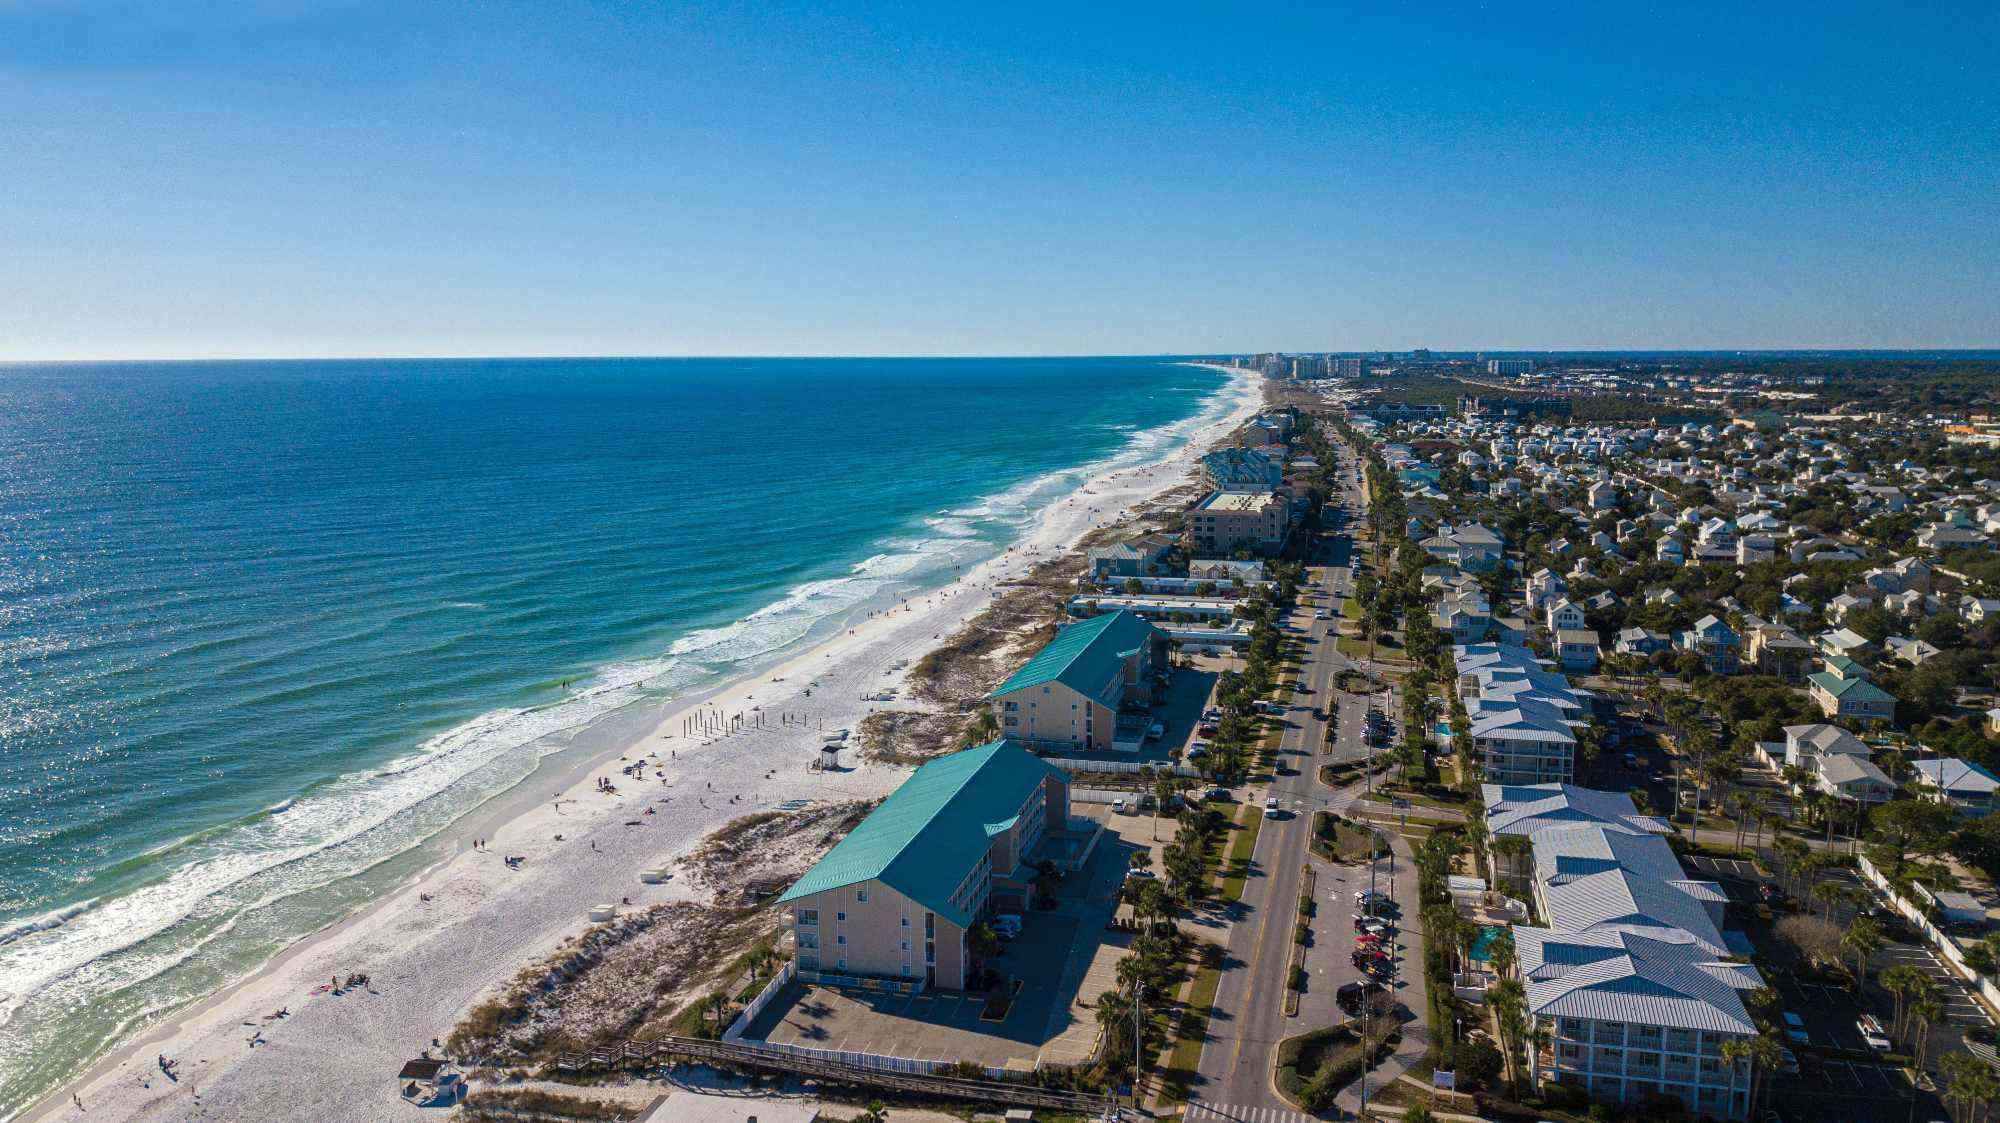 Destin Florida Fishing: All You Need to Know